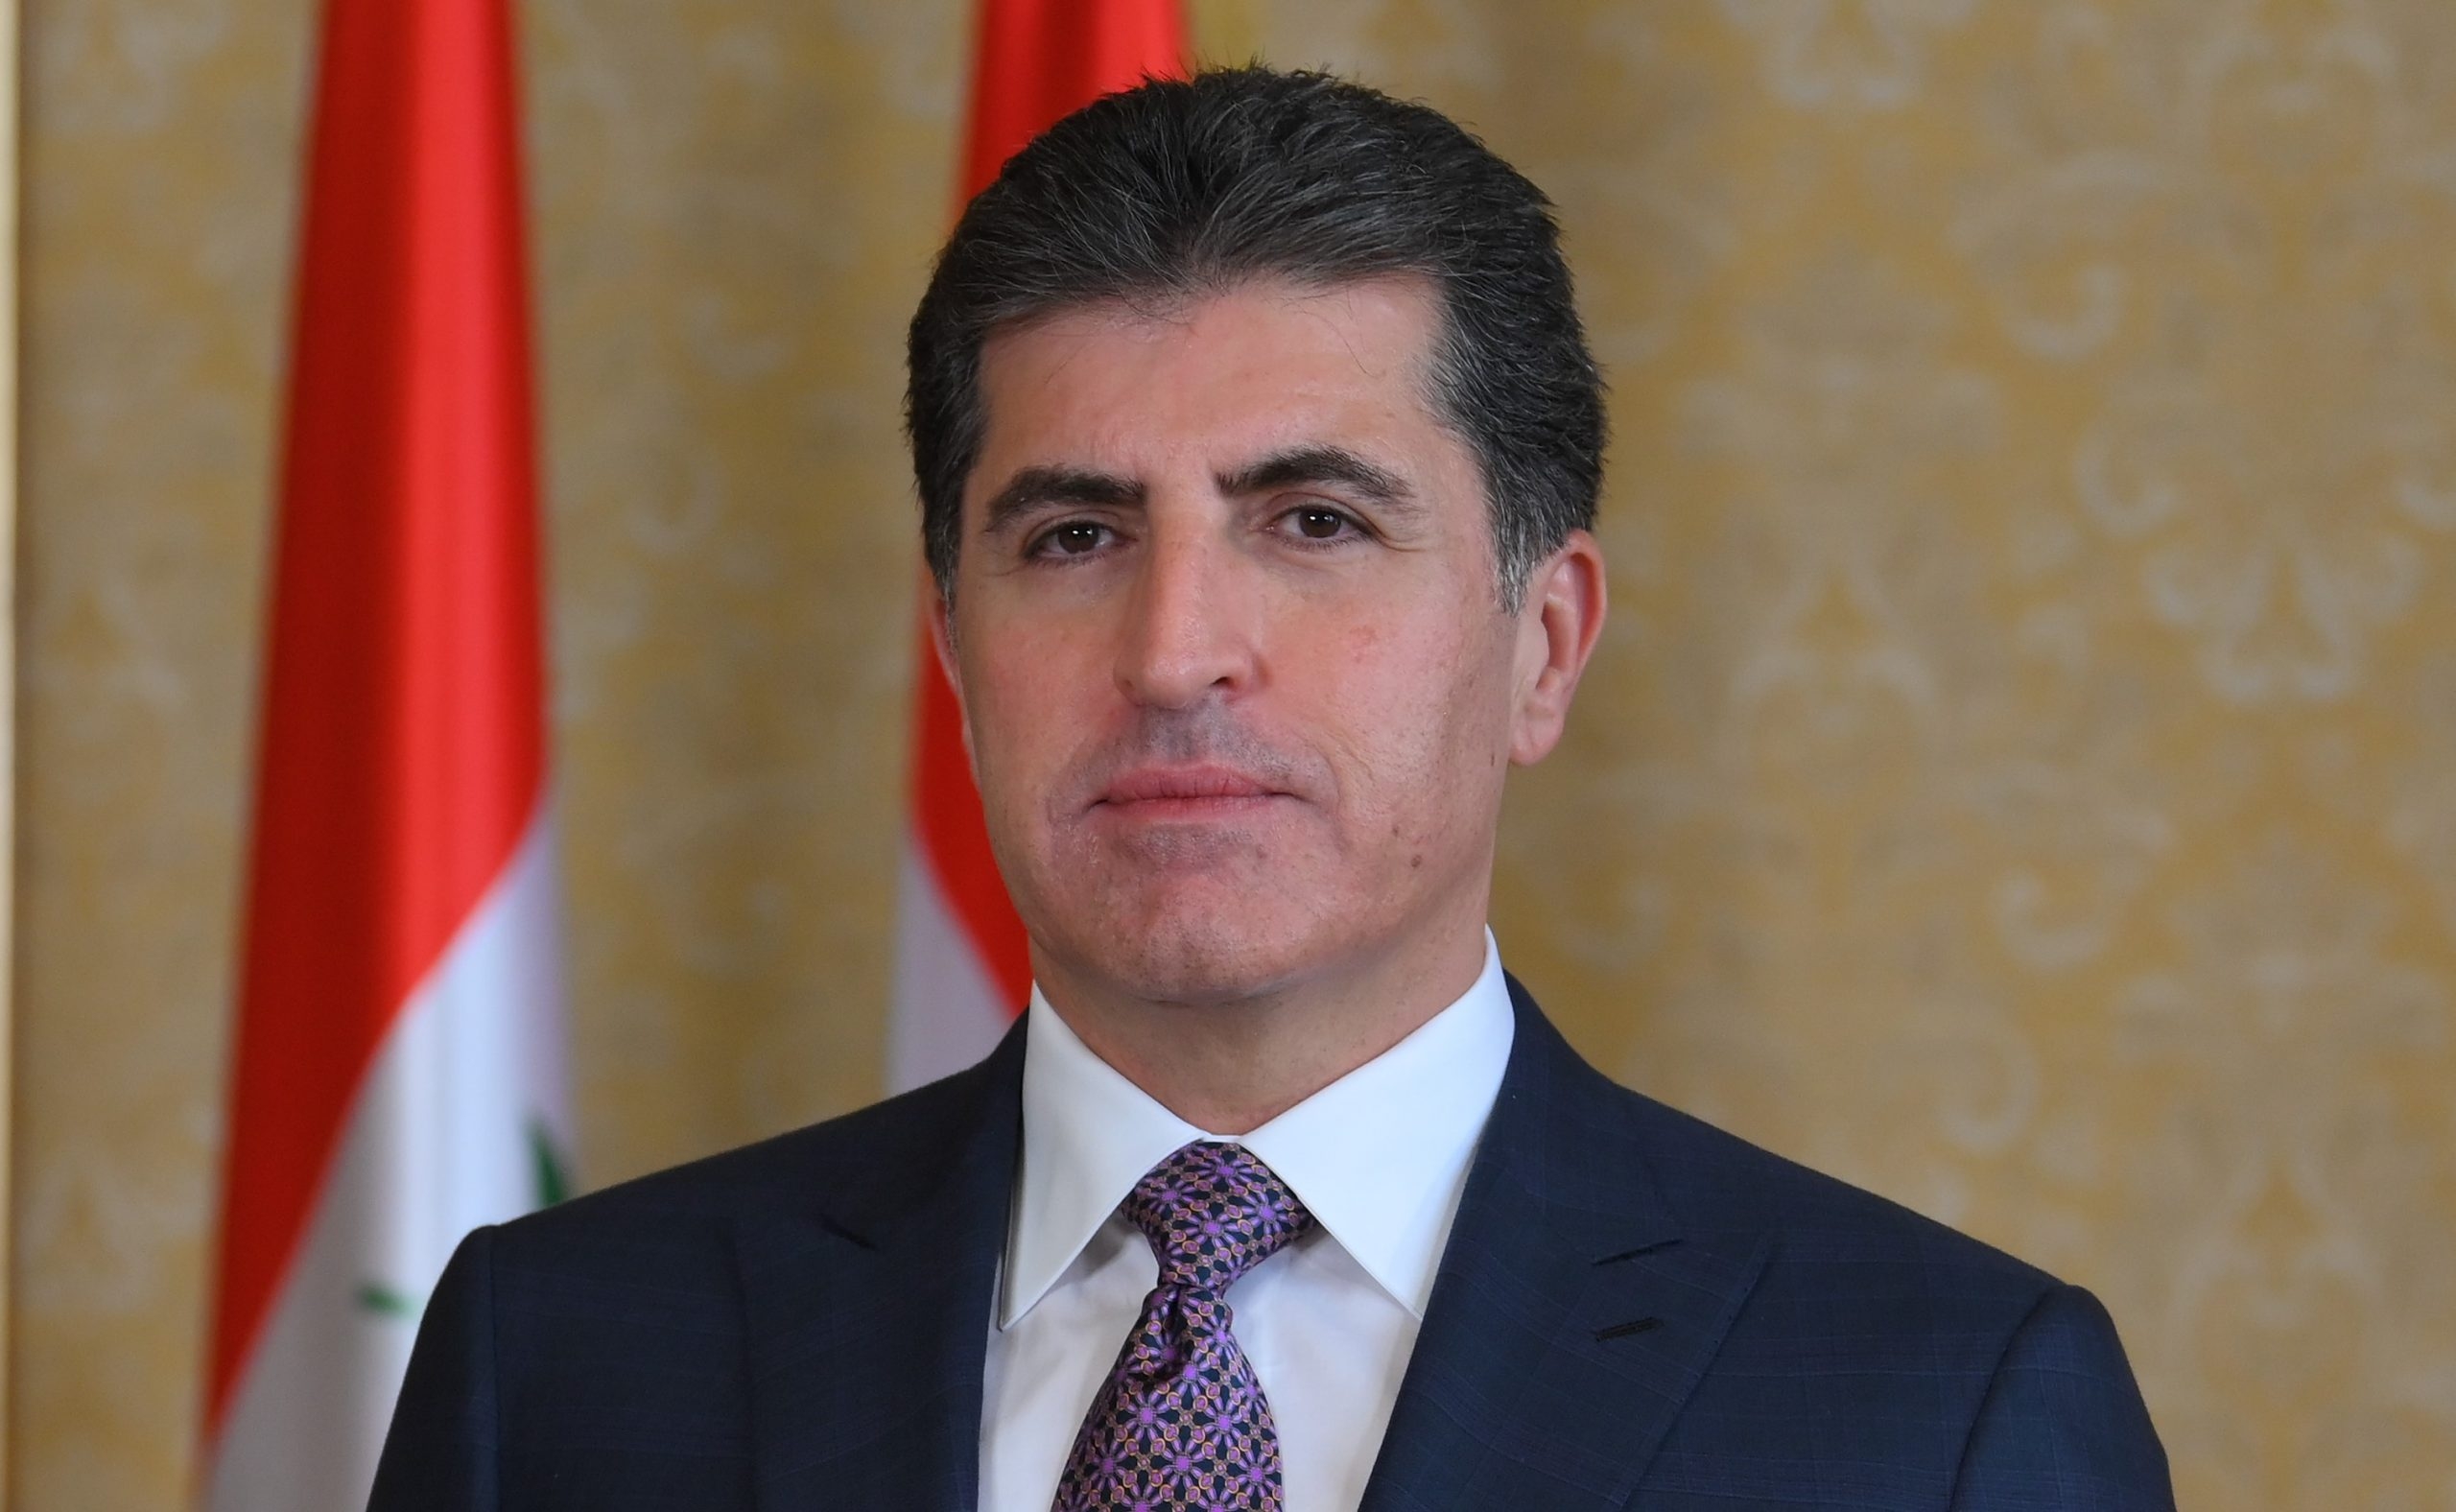 President Nechirvan Barzani extends a message of condolences to France